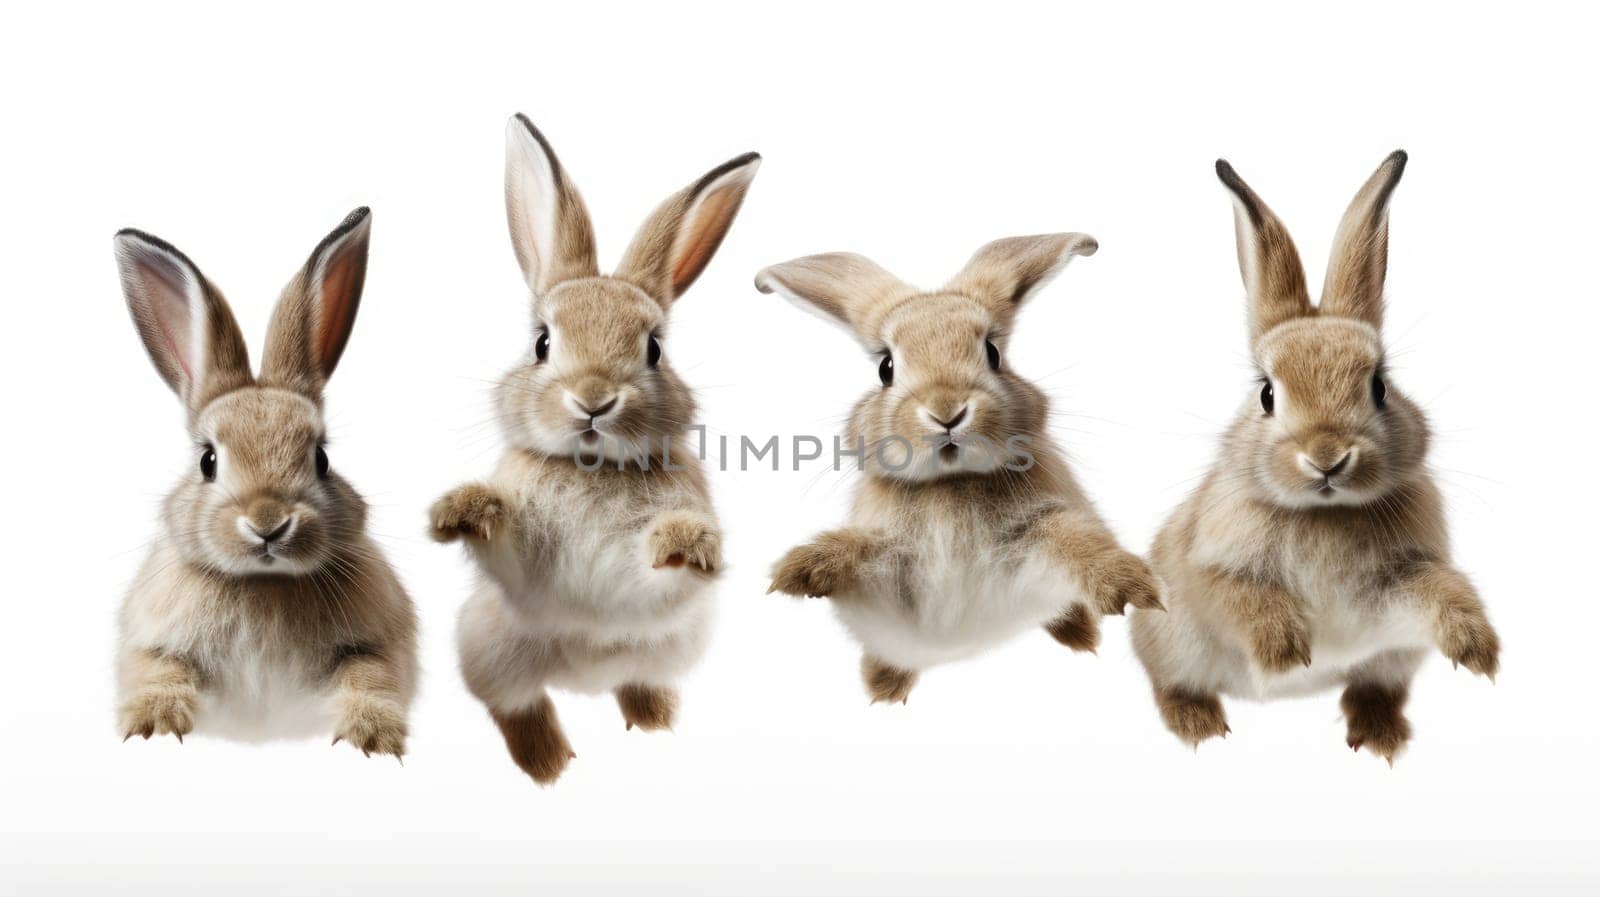 Four adorable brown rabbits with perky ears hopping on white background by JuliaDorian